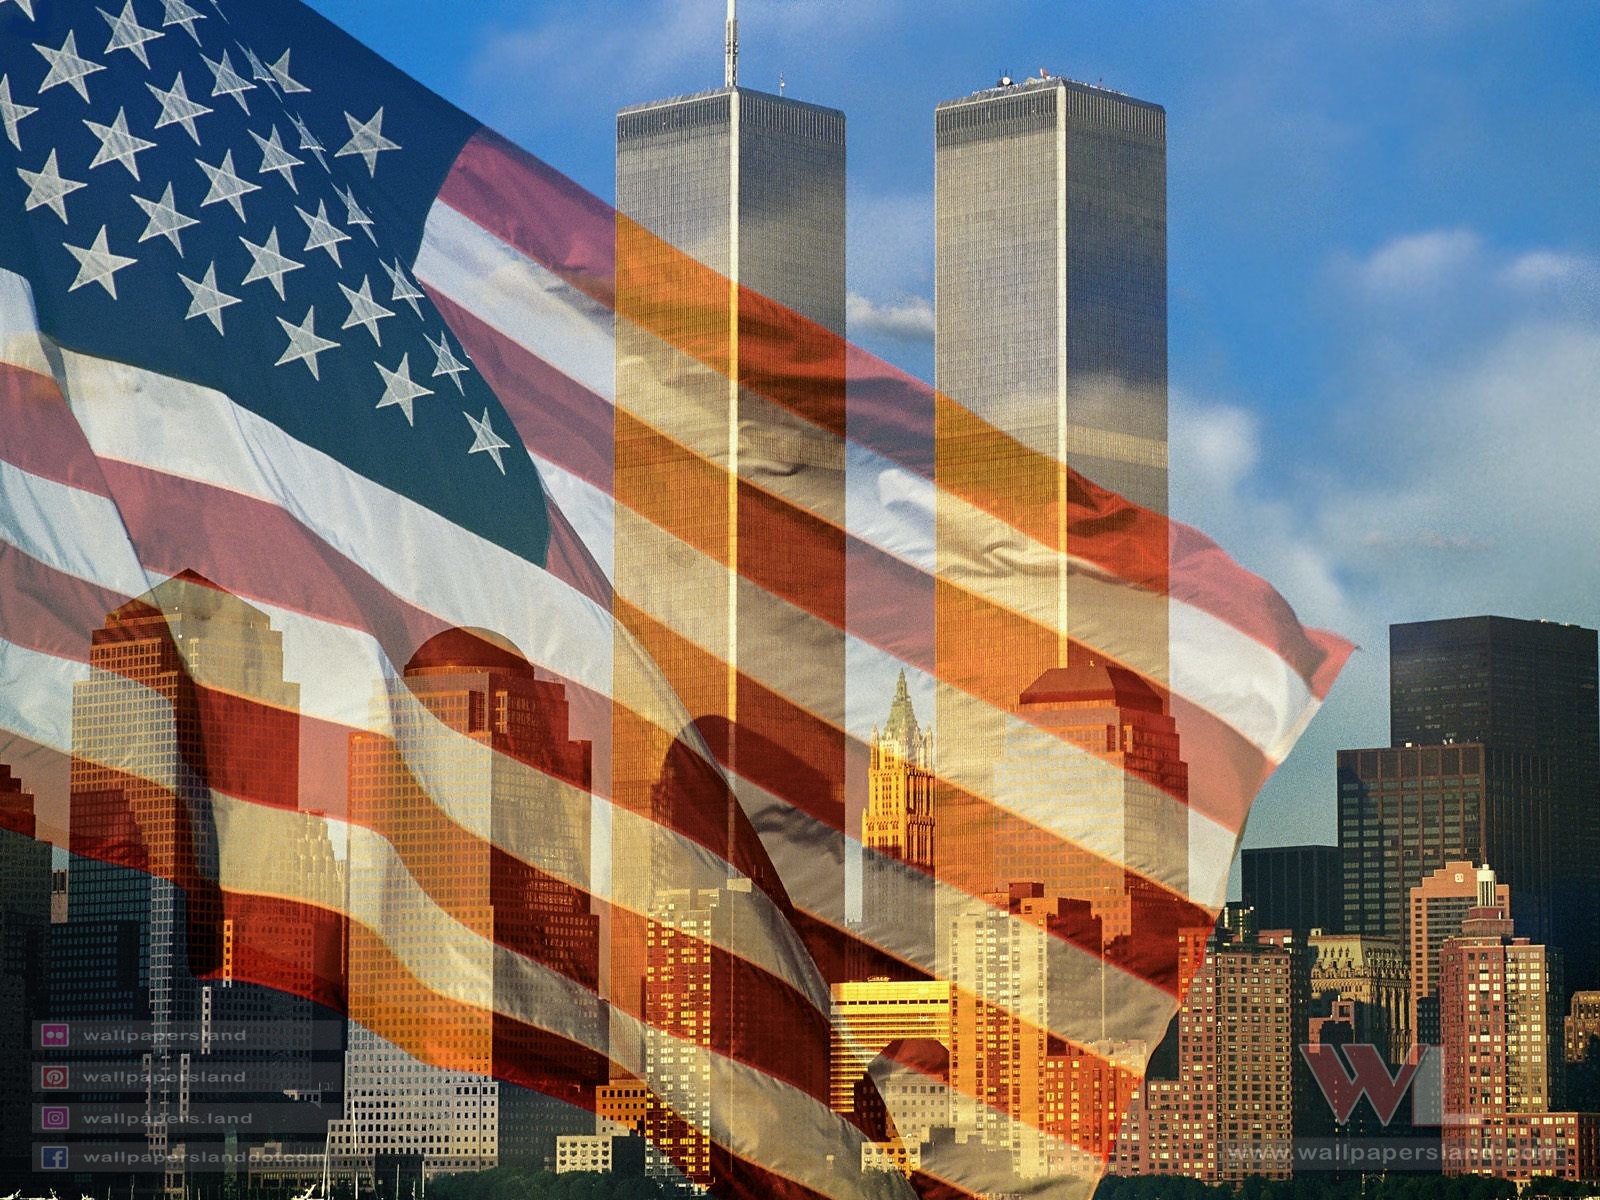 In Remembrance of September 11th